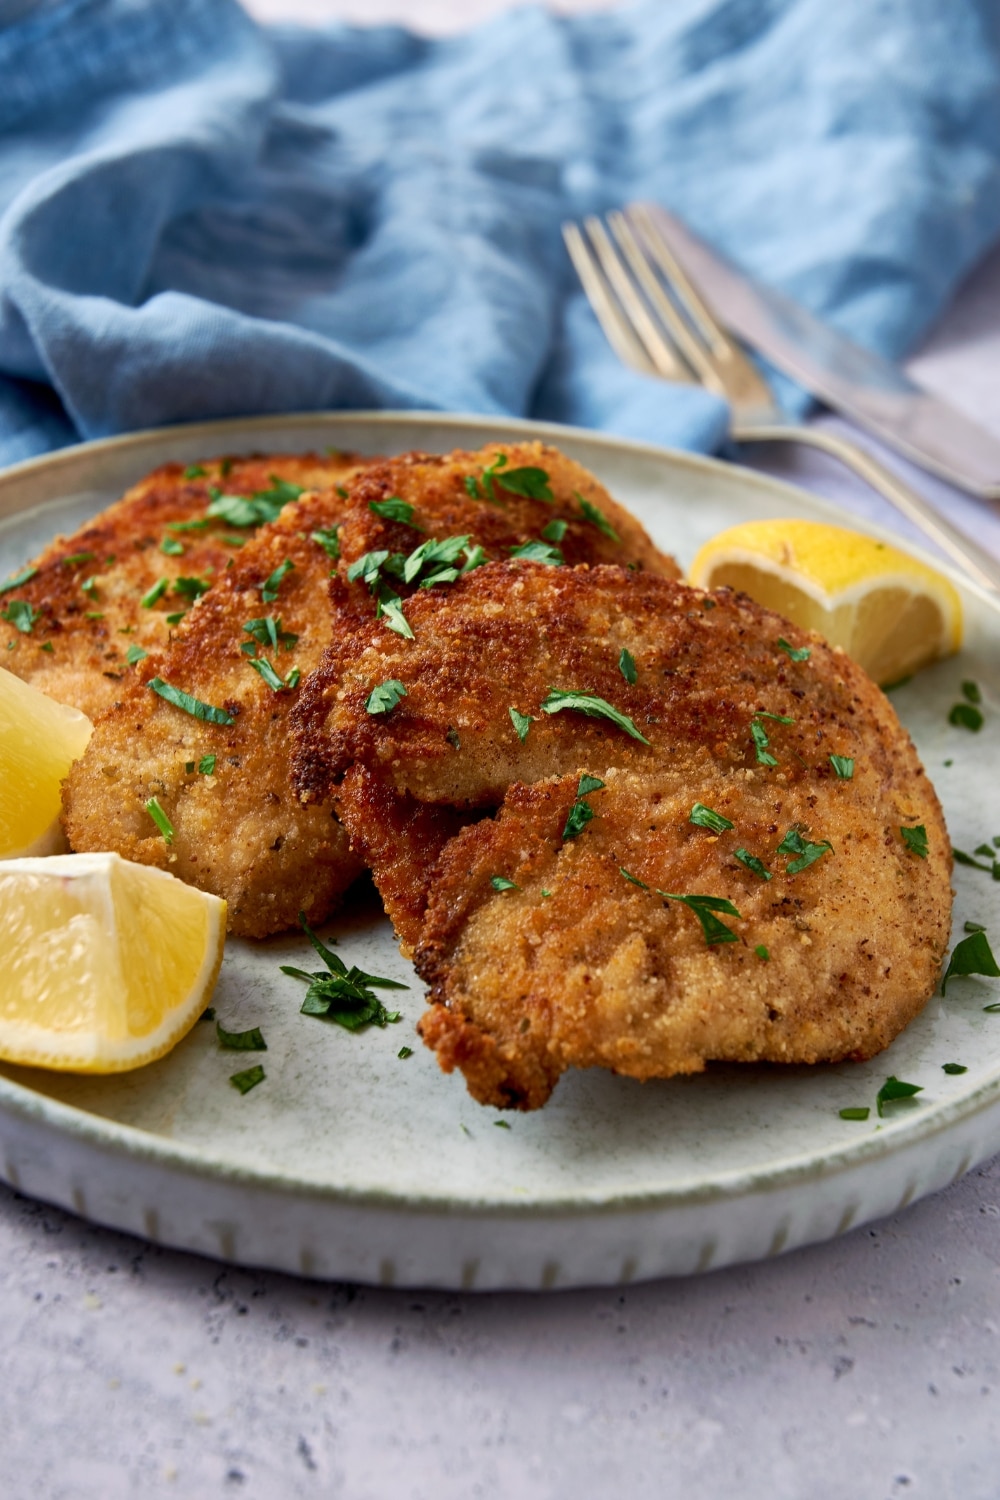 A closer look at crispy turkey cutlets on a plate garnished with fresh herbs and lemon wedges.